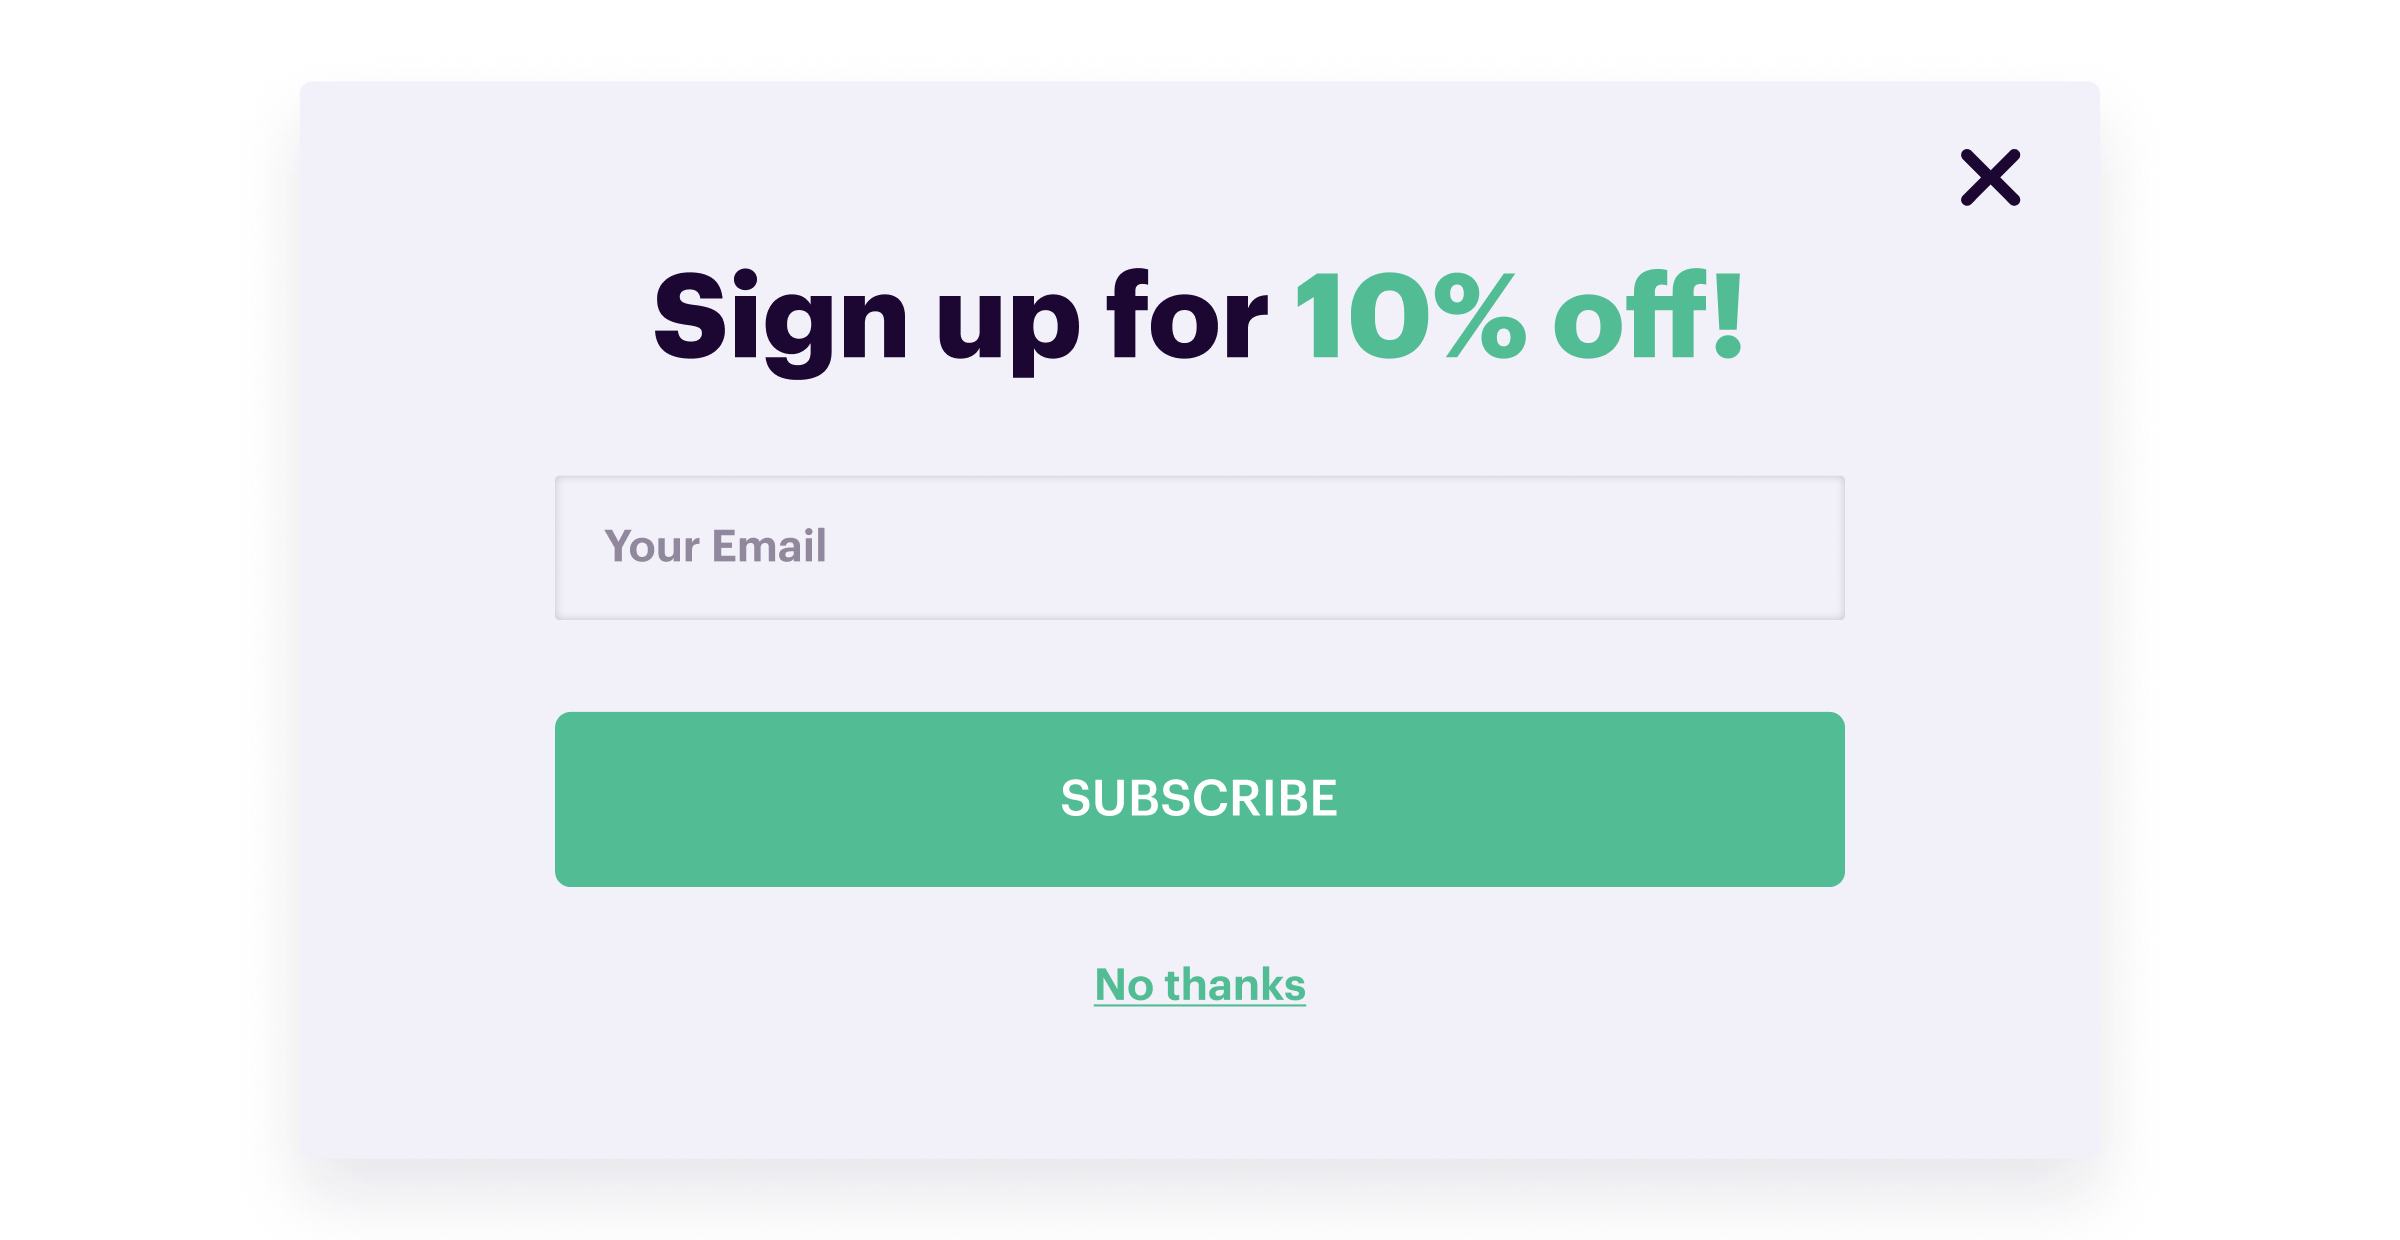 Welcome Modal for Email Address